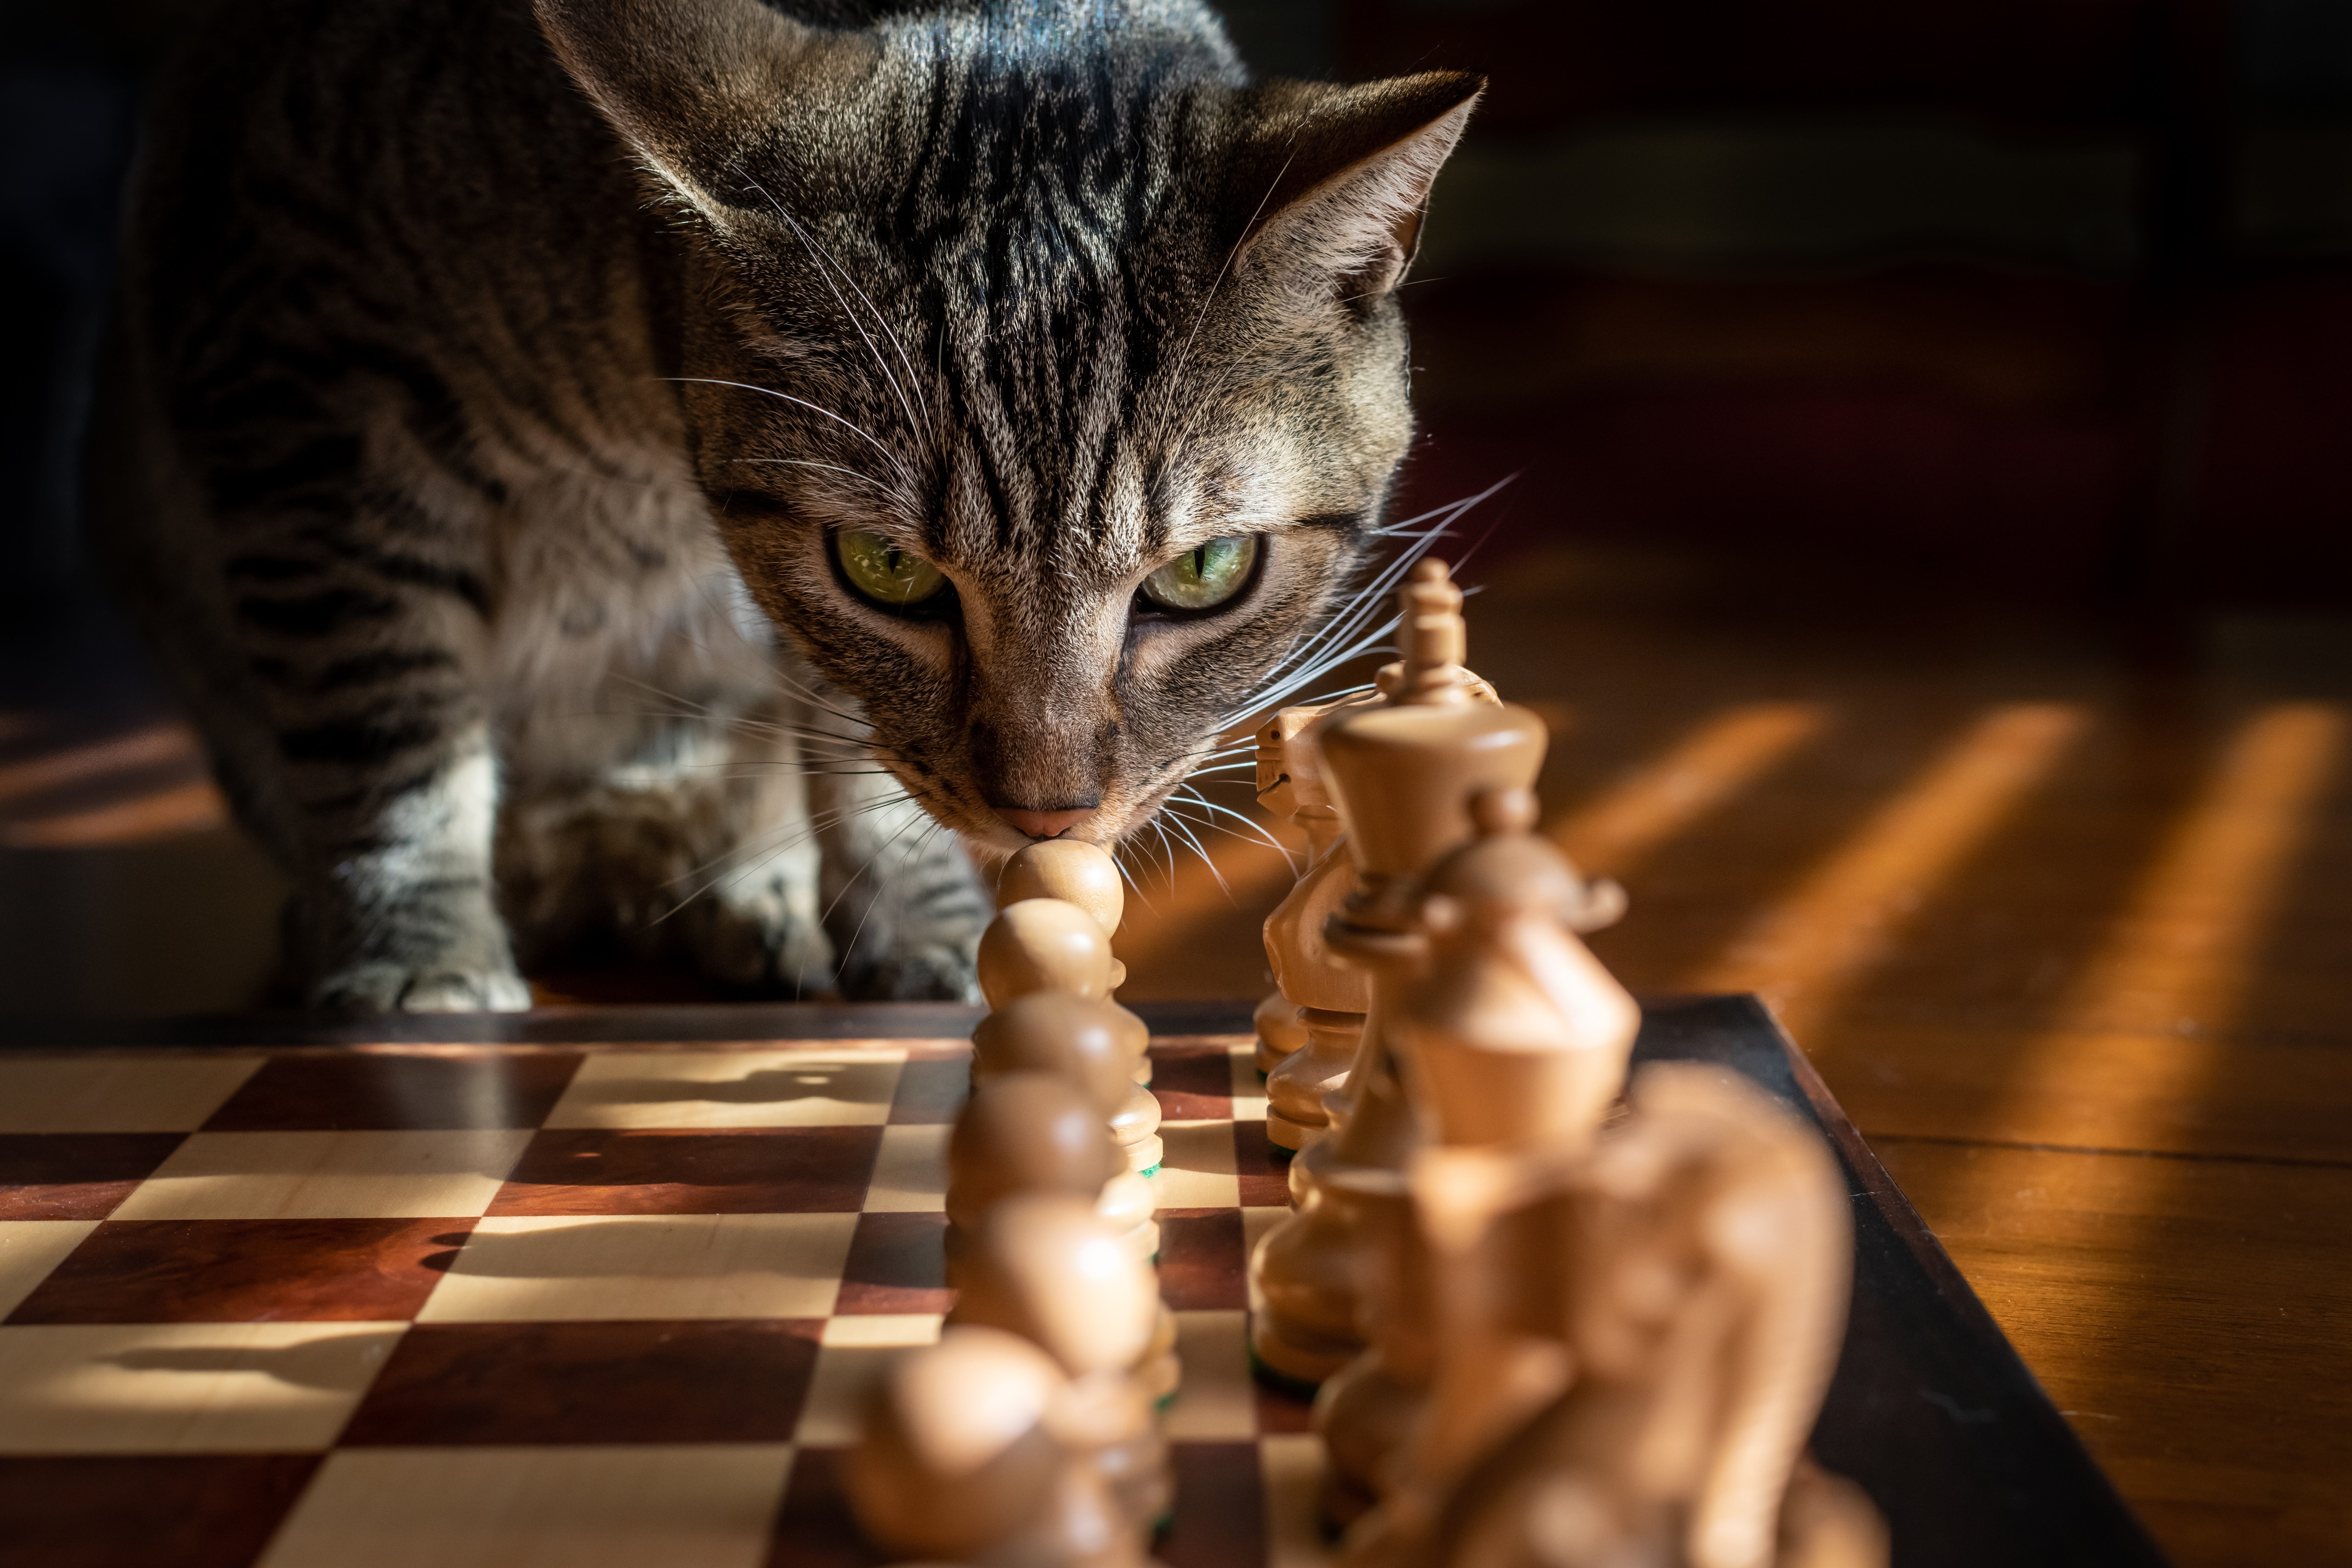 The Importance Of Not Showing Your Next Move